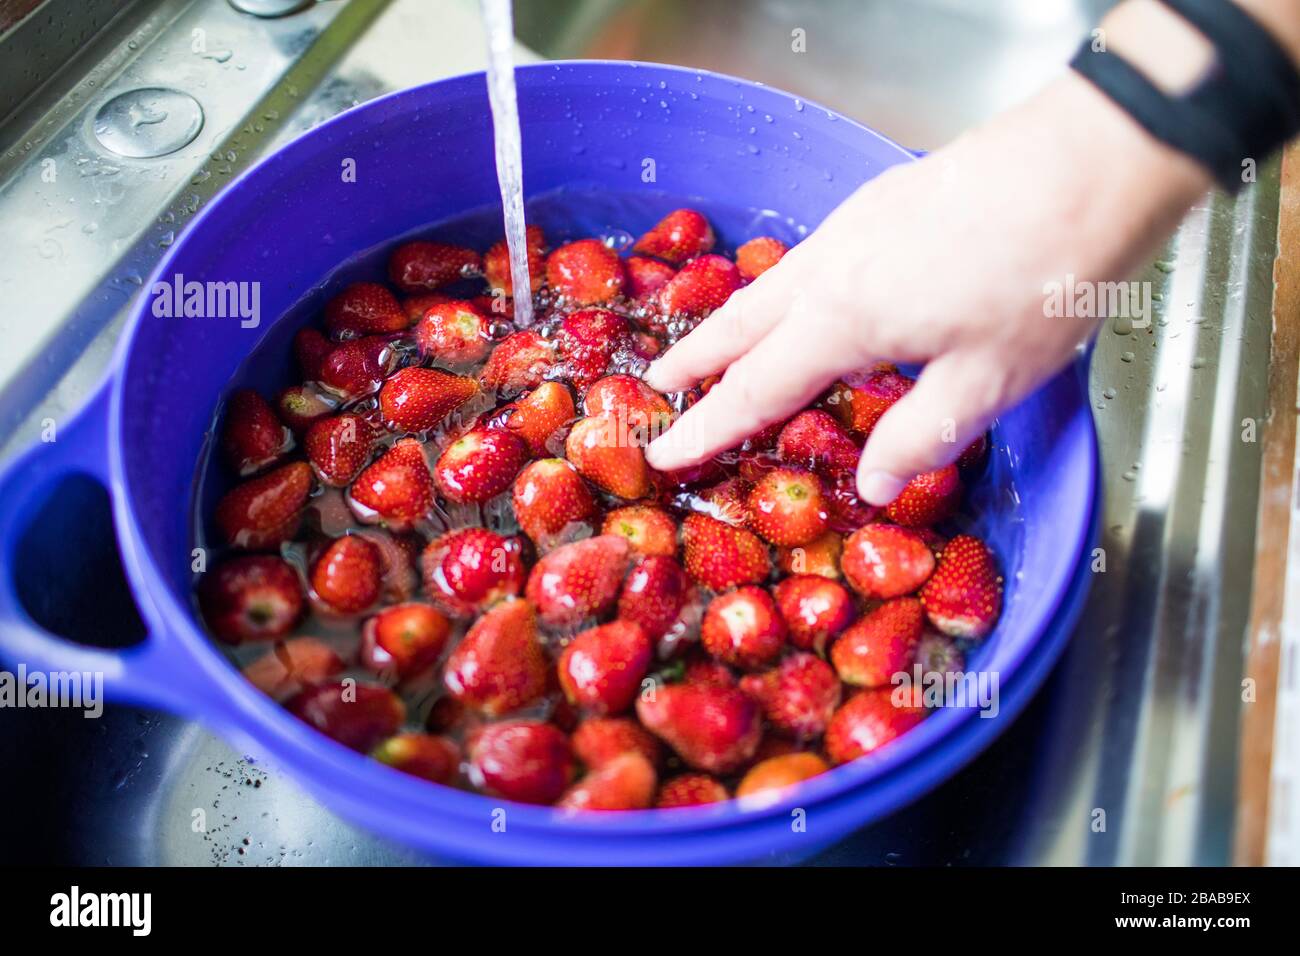 washing fresh strawberries with water in the sink. Stock Photo